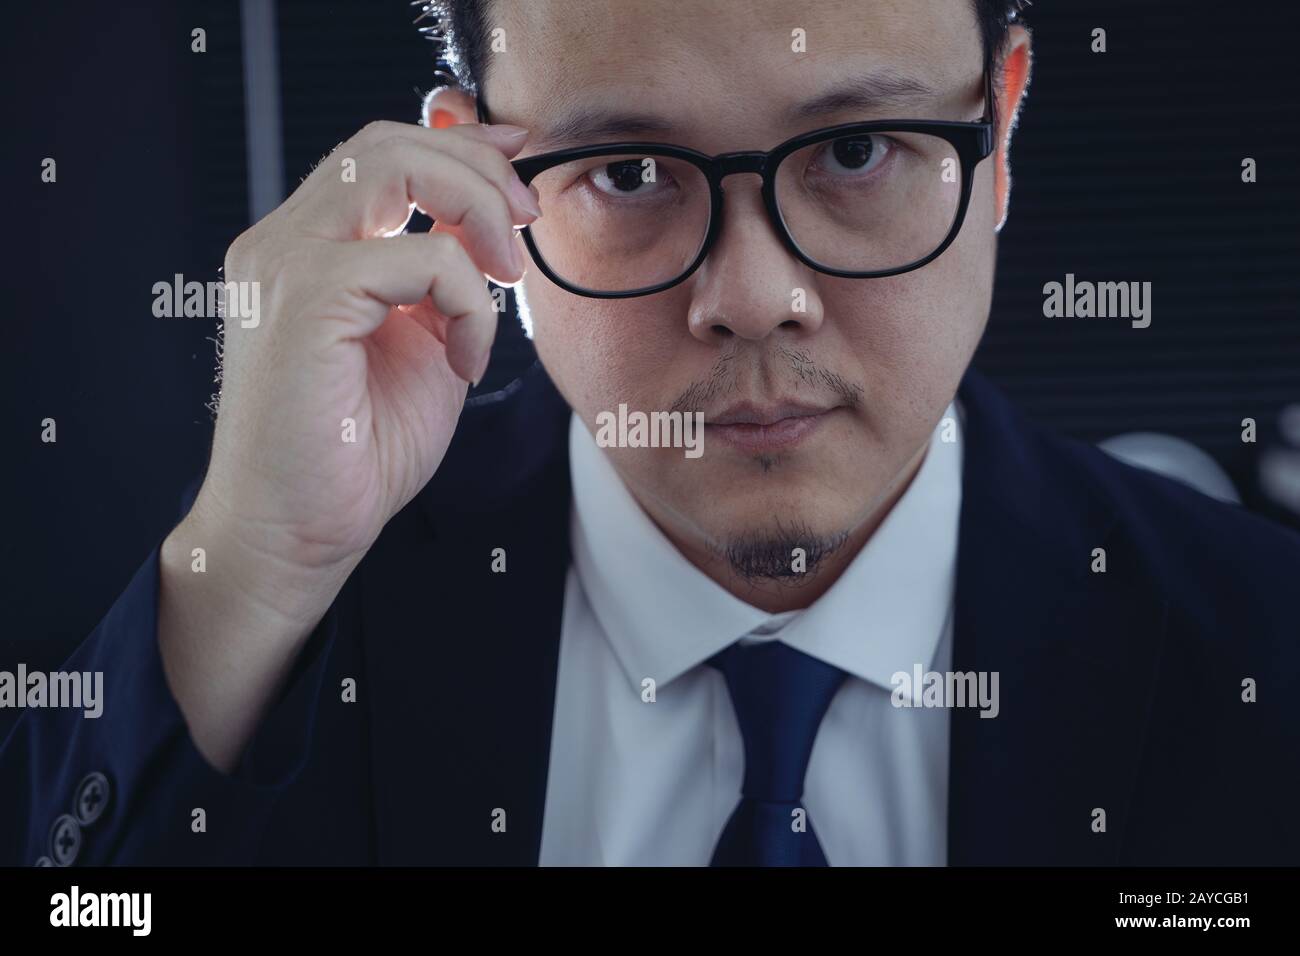 Smart businessman in suit and eyeglasses looking at camera . Closeup view . Stock Photo